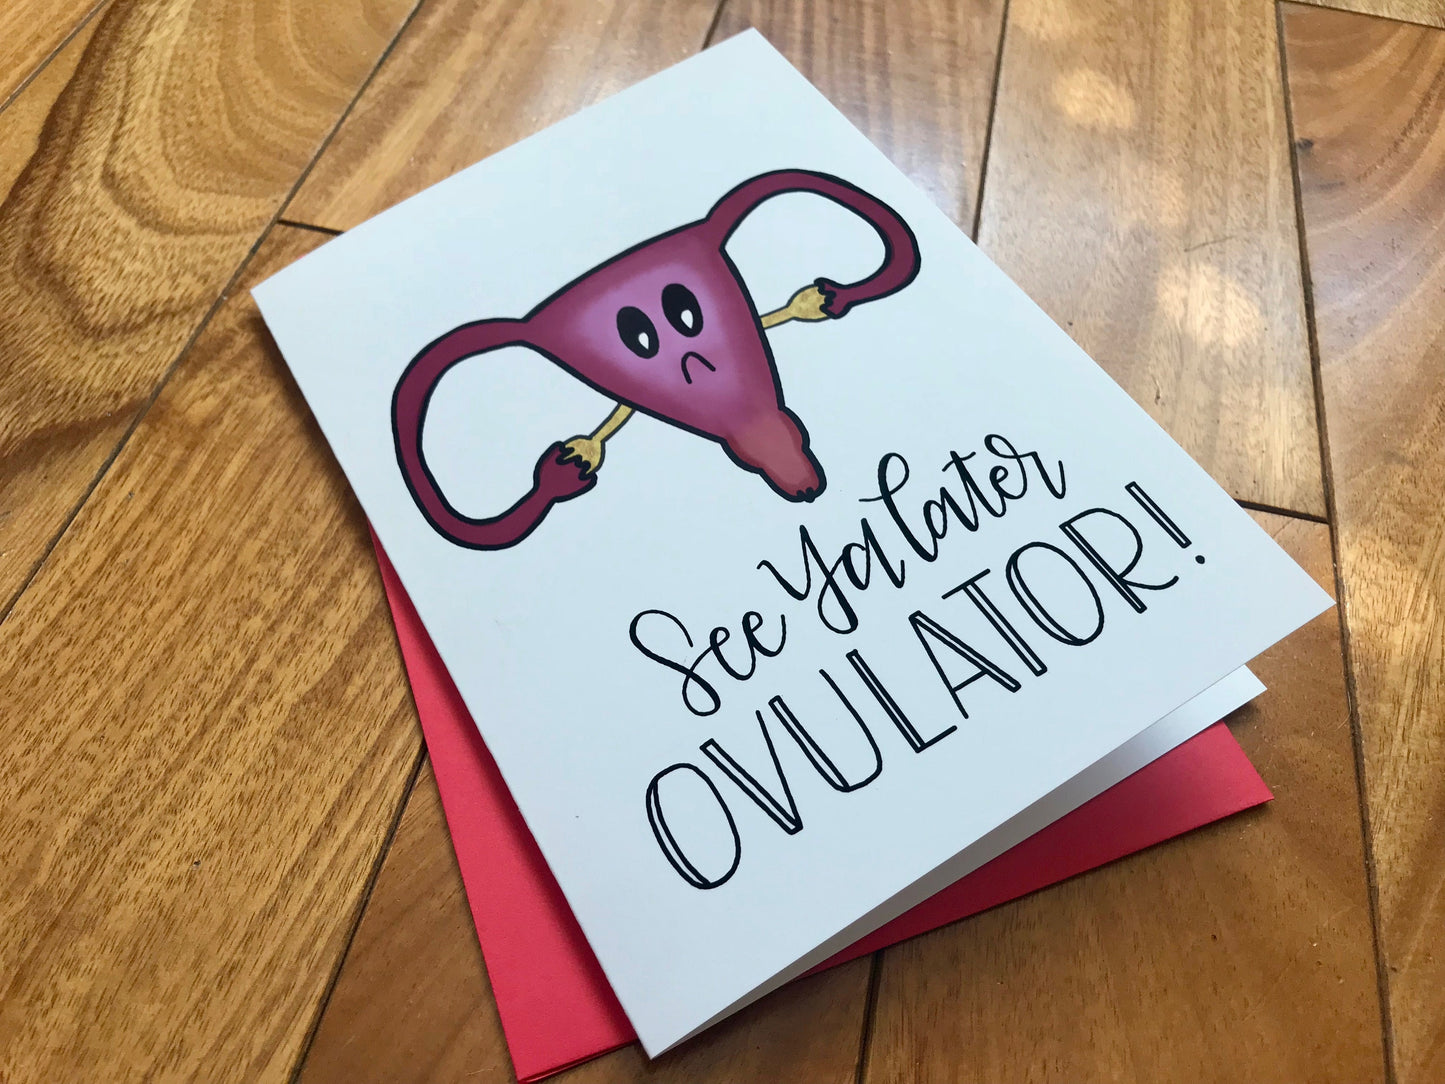 See Ya Later Ovulator Hysterectomy Card by StoneDonut Design